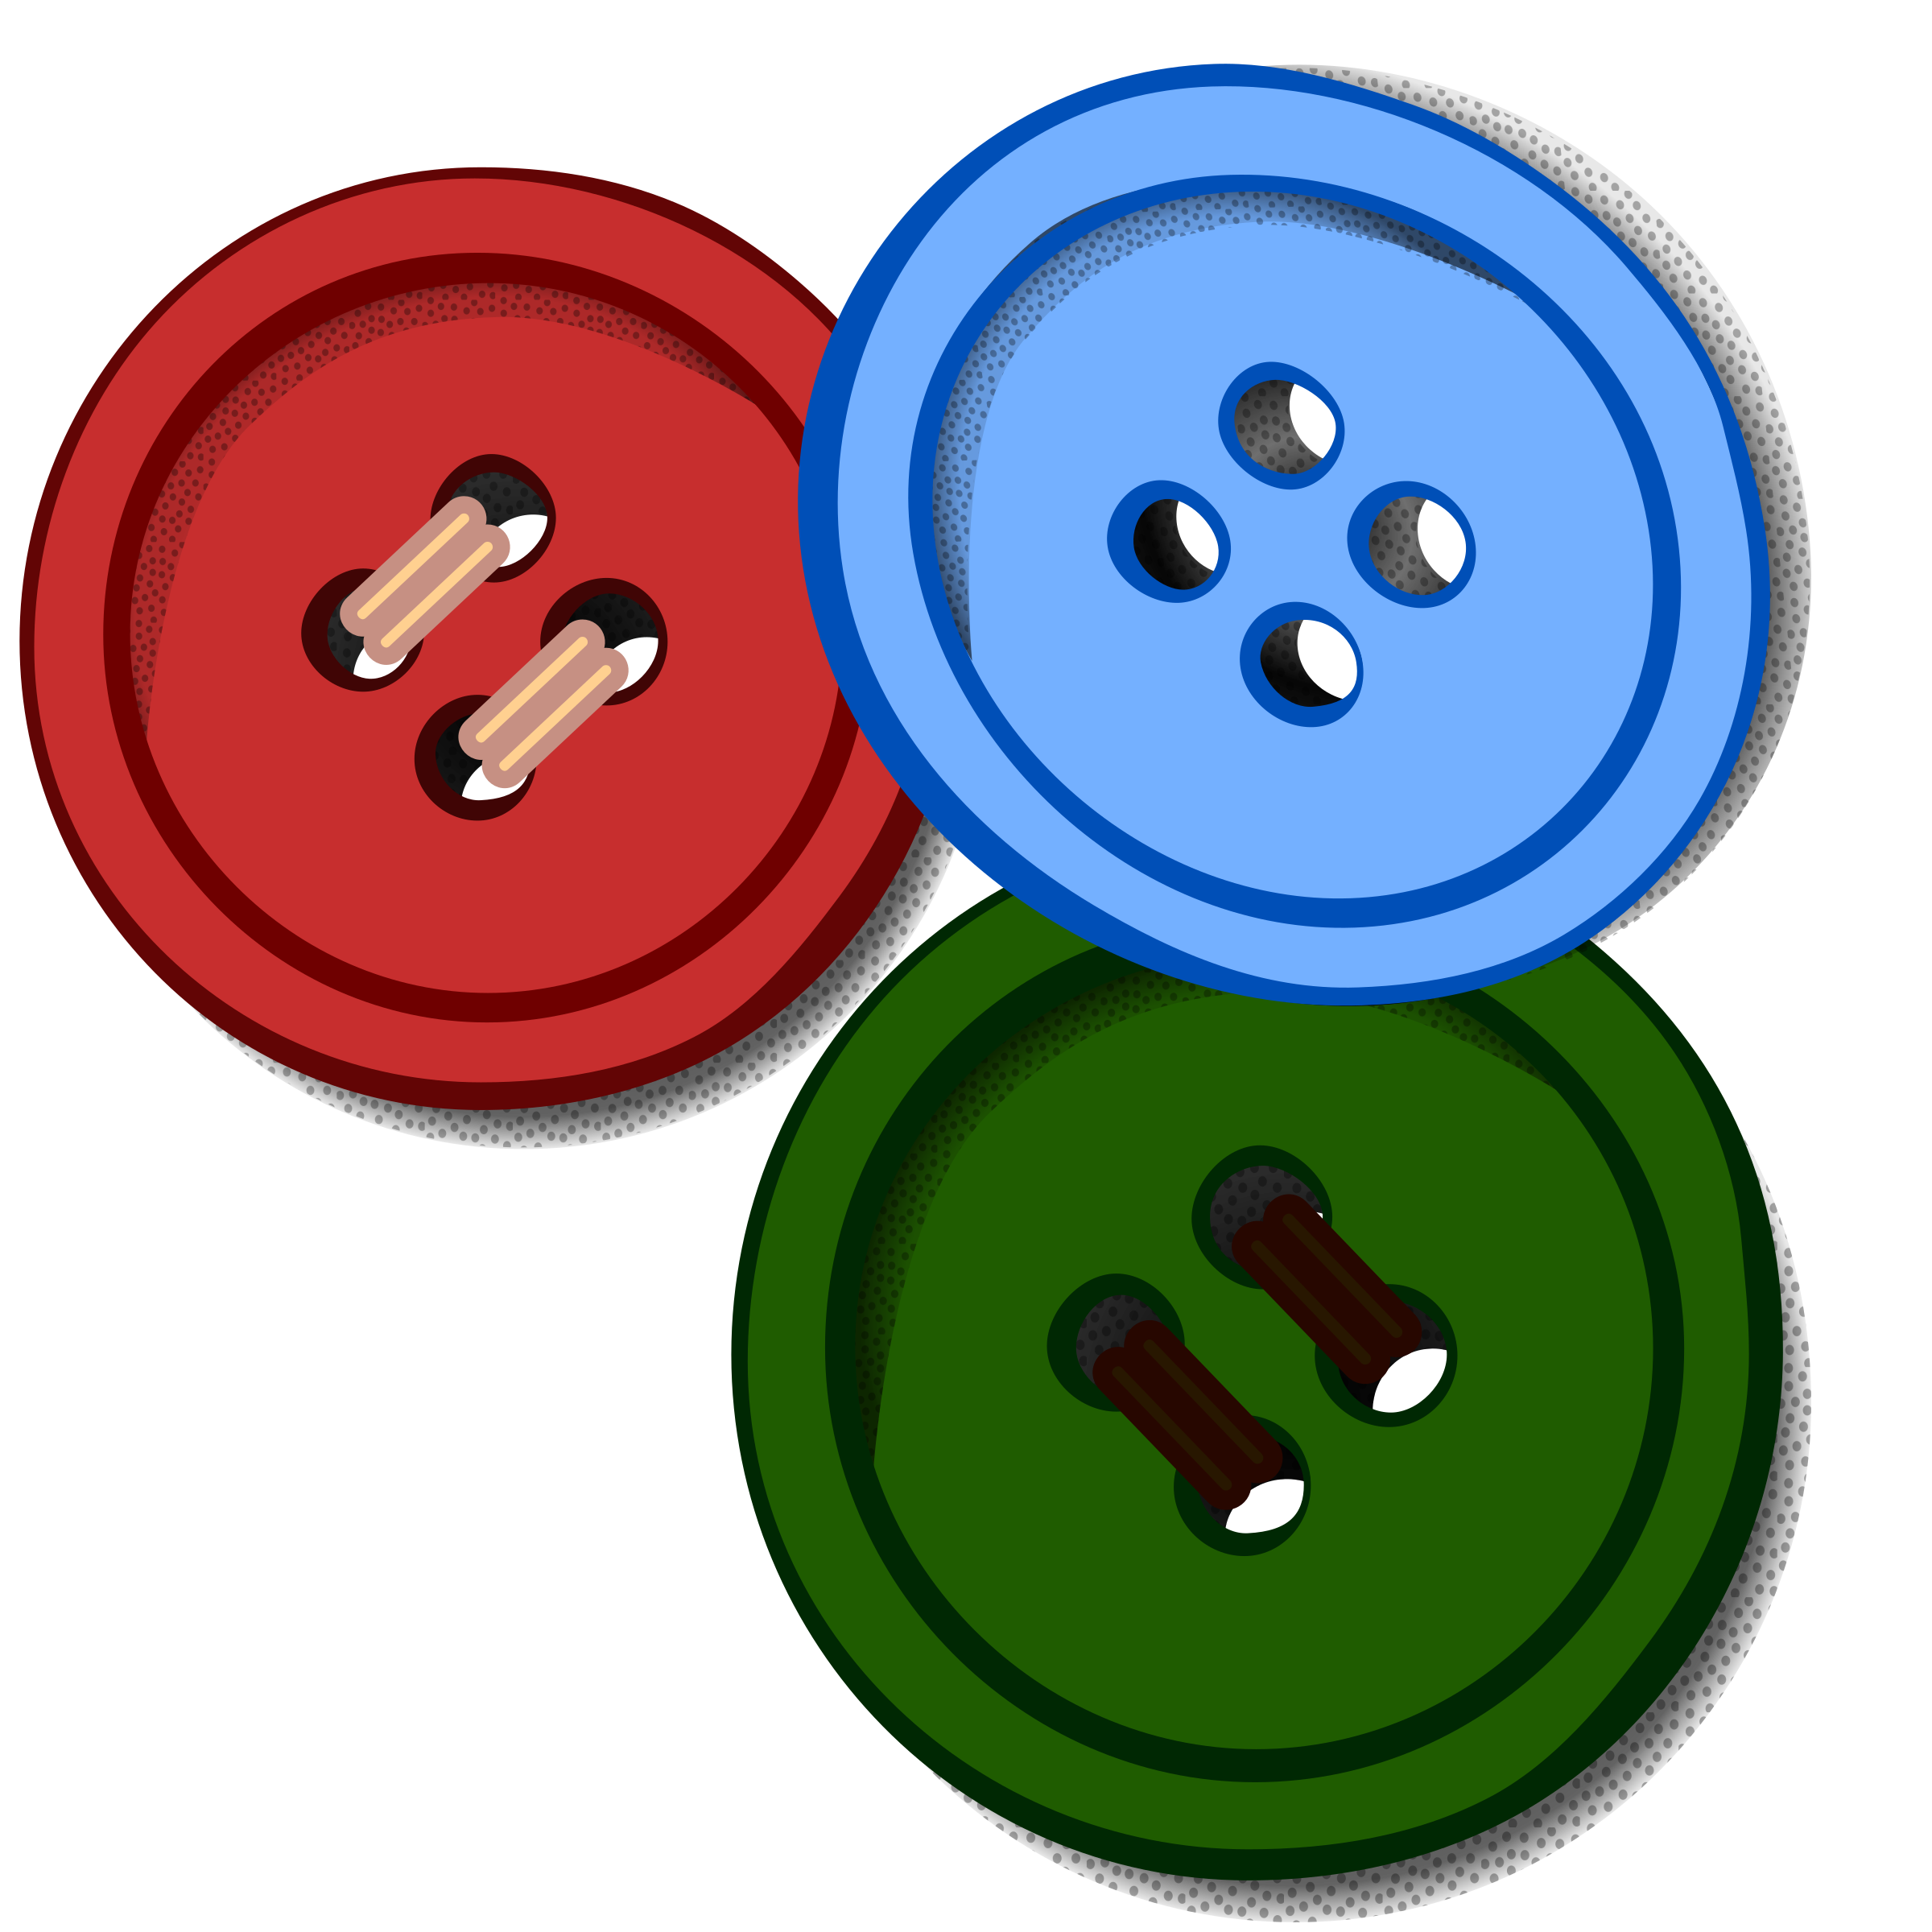 Realistic colored buttons Royalty Free Vector Image